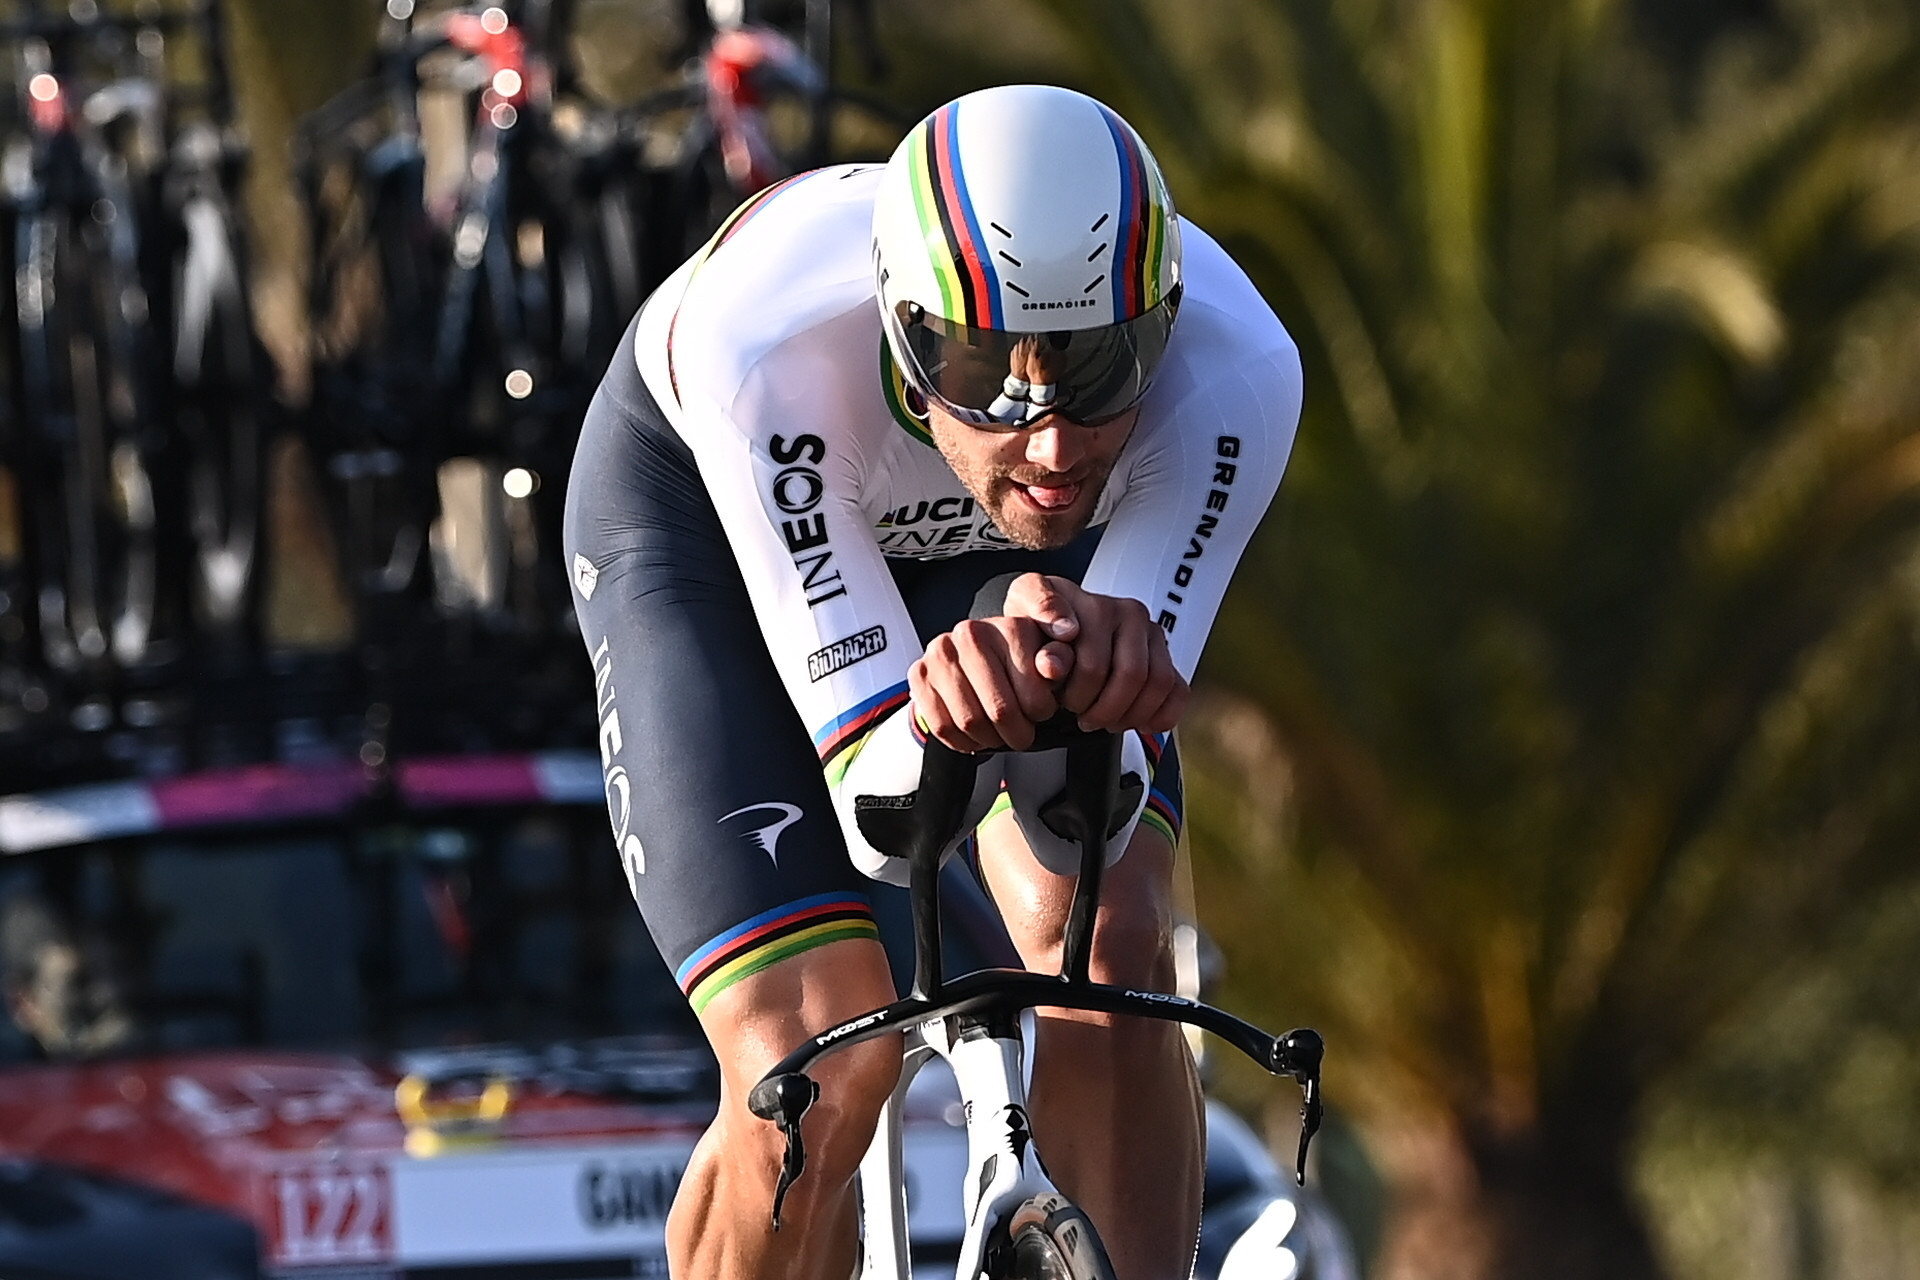 Ganna wins time trial to take first leader's jersey at Tirreno-Adriatico